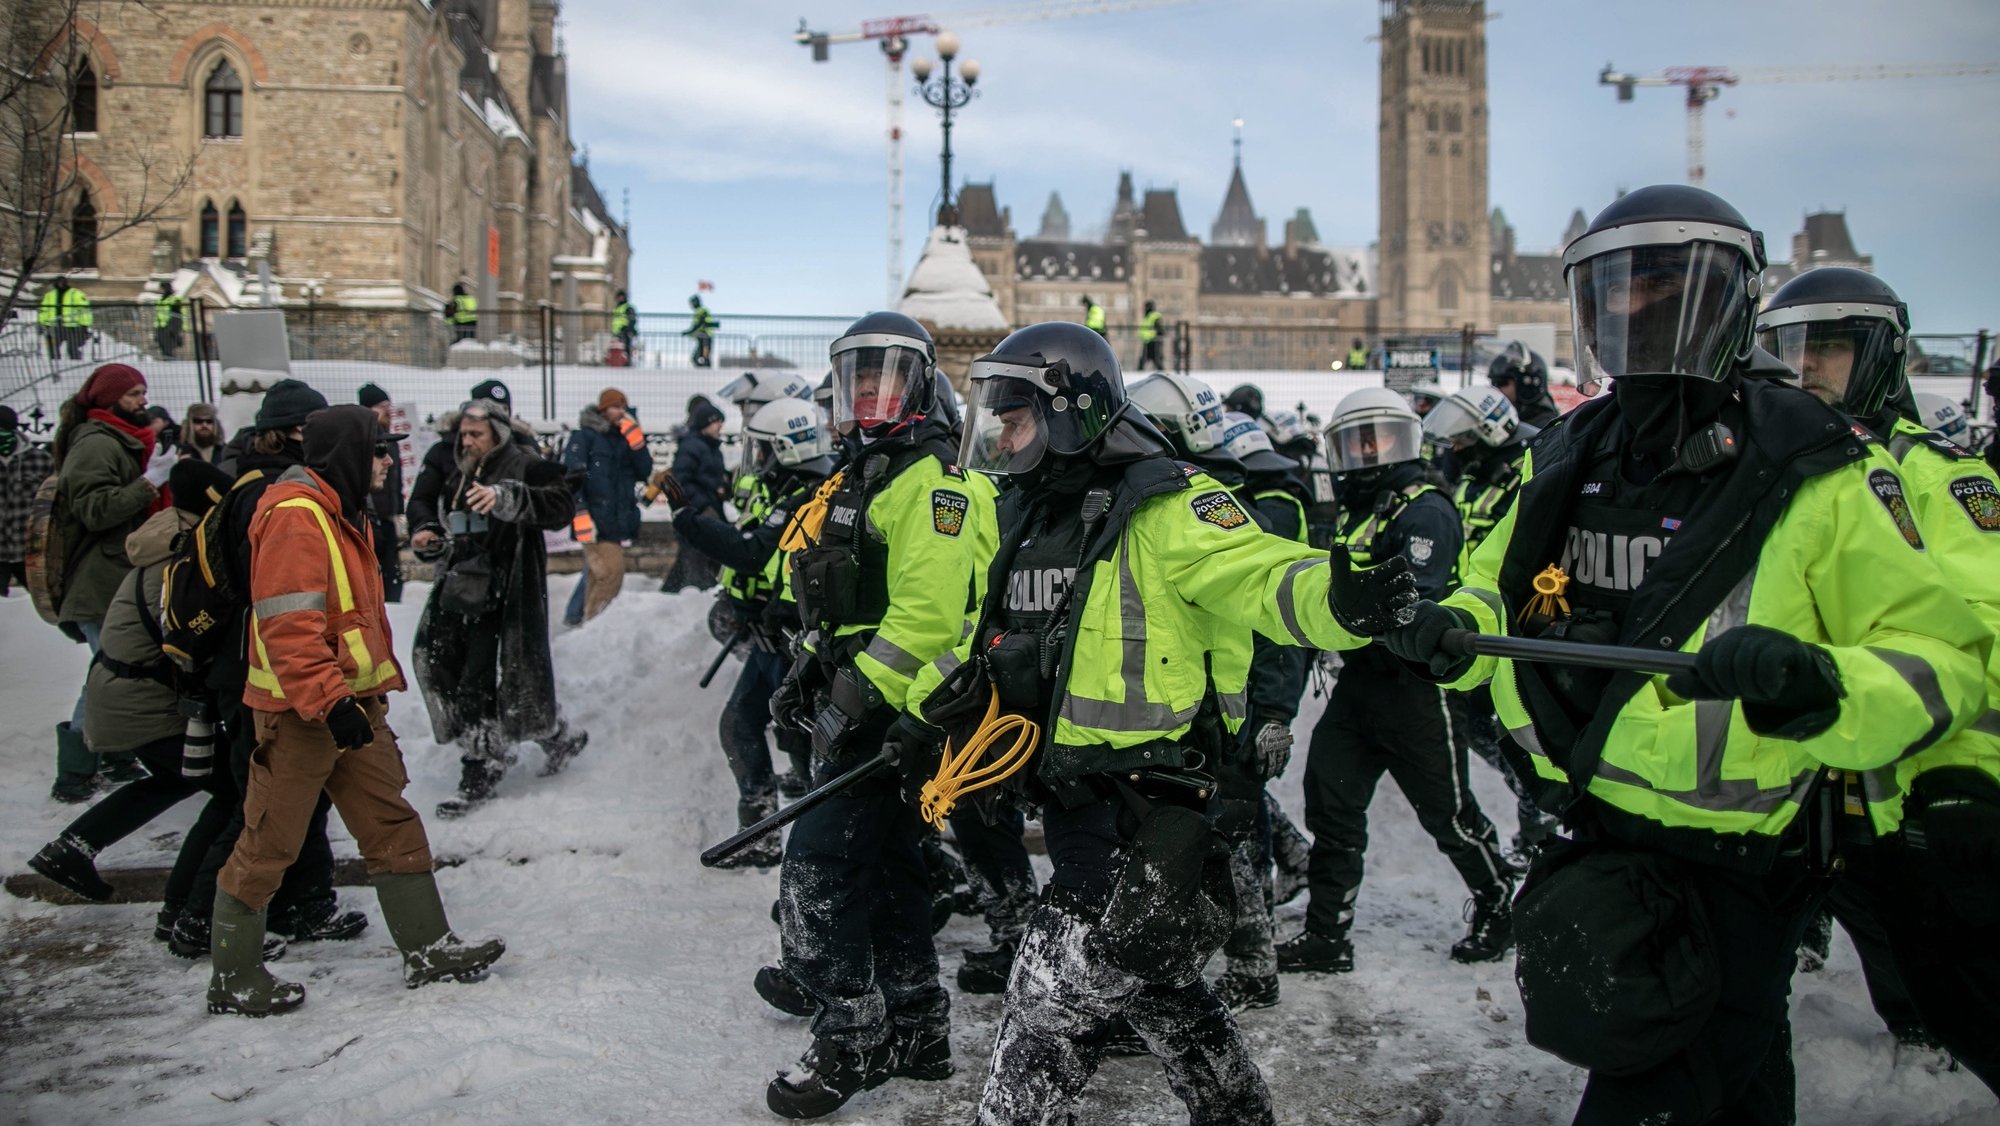 epa09773057 Police forces clash with protesters in Ottawa  city center as they clear a protest by Canadian truck drivers over Covid-19 restrictions which has led to gridlock in Ottawa, Canada, 19 February 2022. The protest is against the mandate by the Canadian government that truckers must be vaccinated. Police moved in on 18 and 19 February to clear protesters and dozens of arrests were made. Willington street where the parliament hill is located was cleared of all protesters on 19 February.  EPA/AMRU SALAHUDDIEN